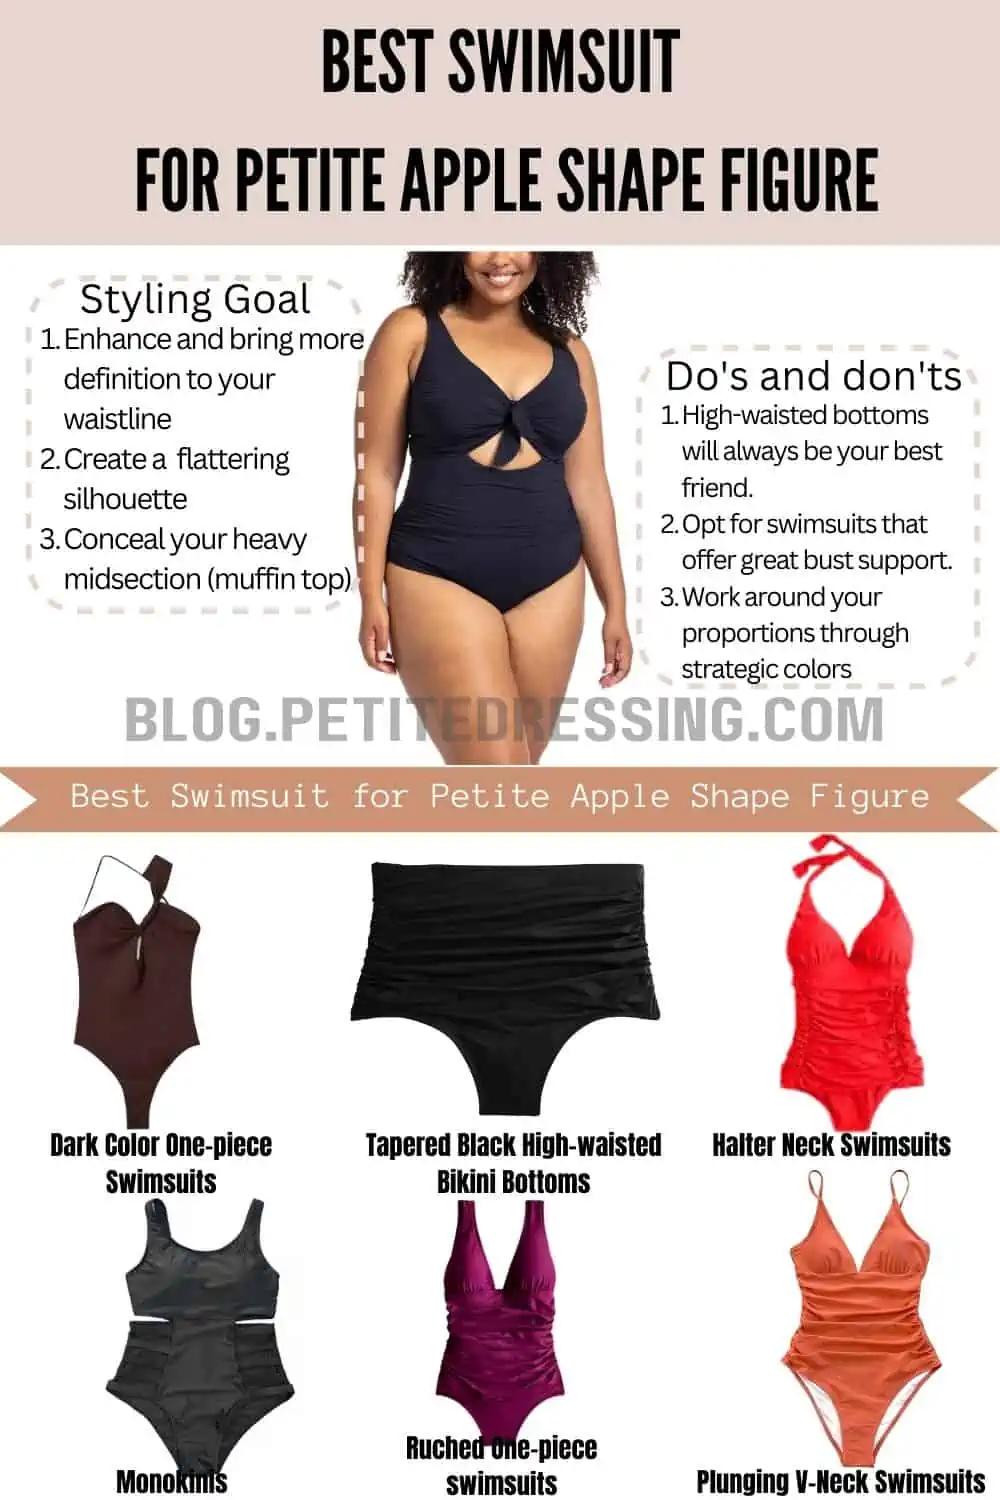 Swimwear Style Guide, Styles for Every Shape